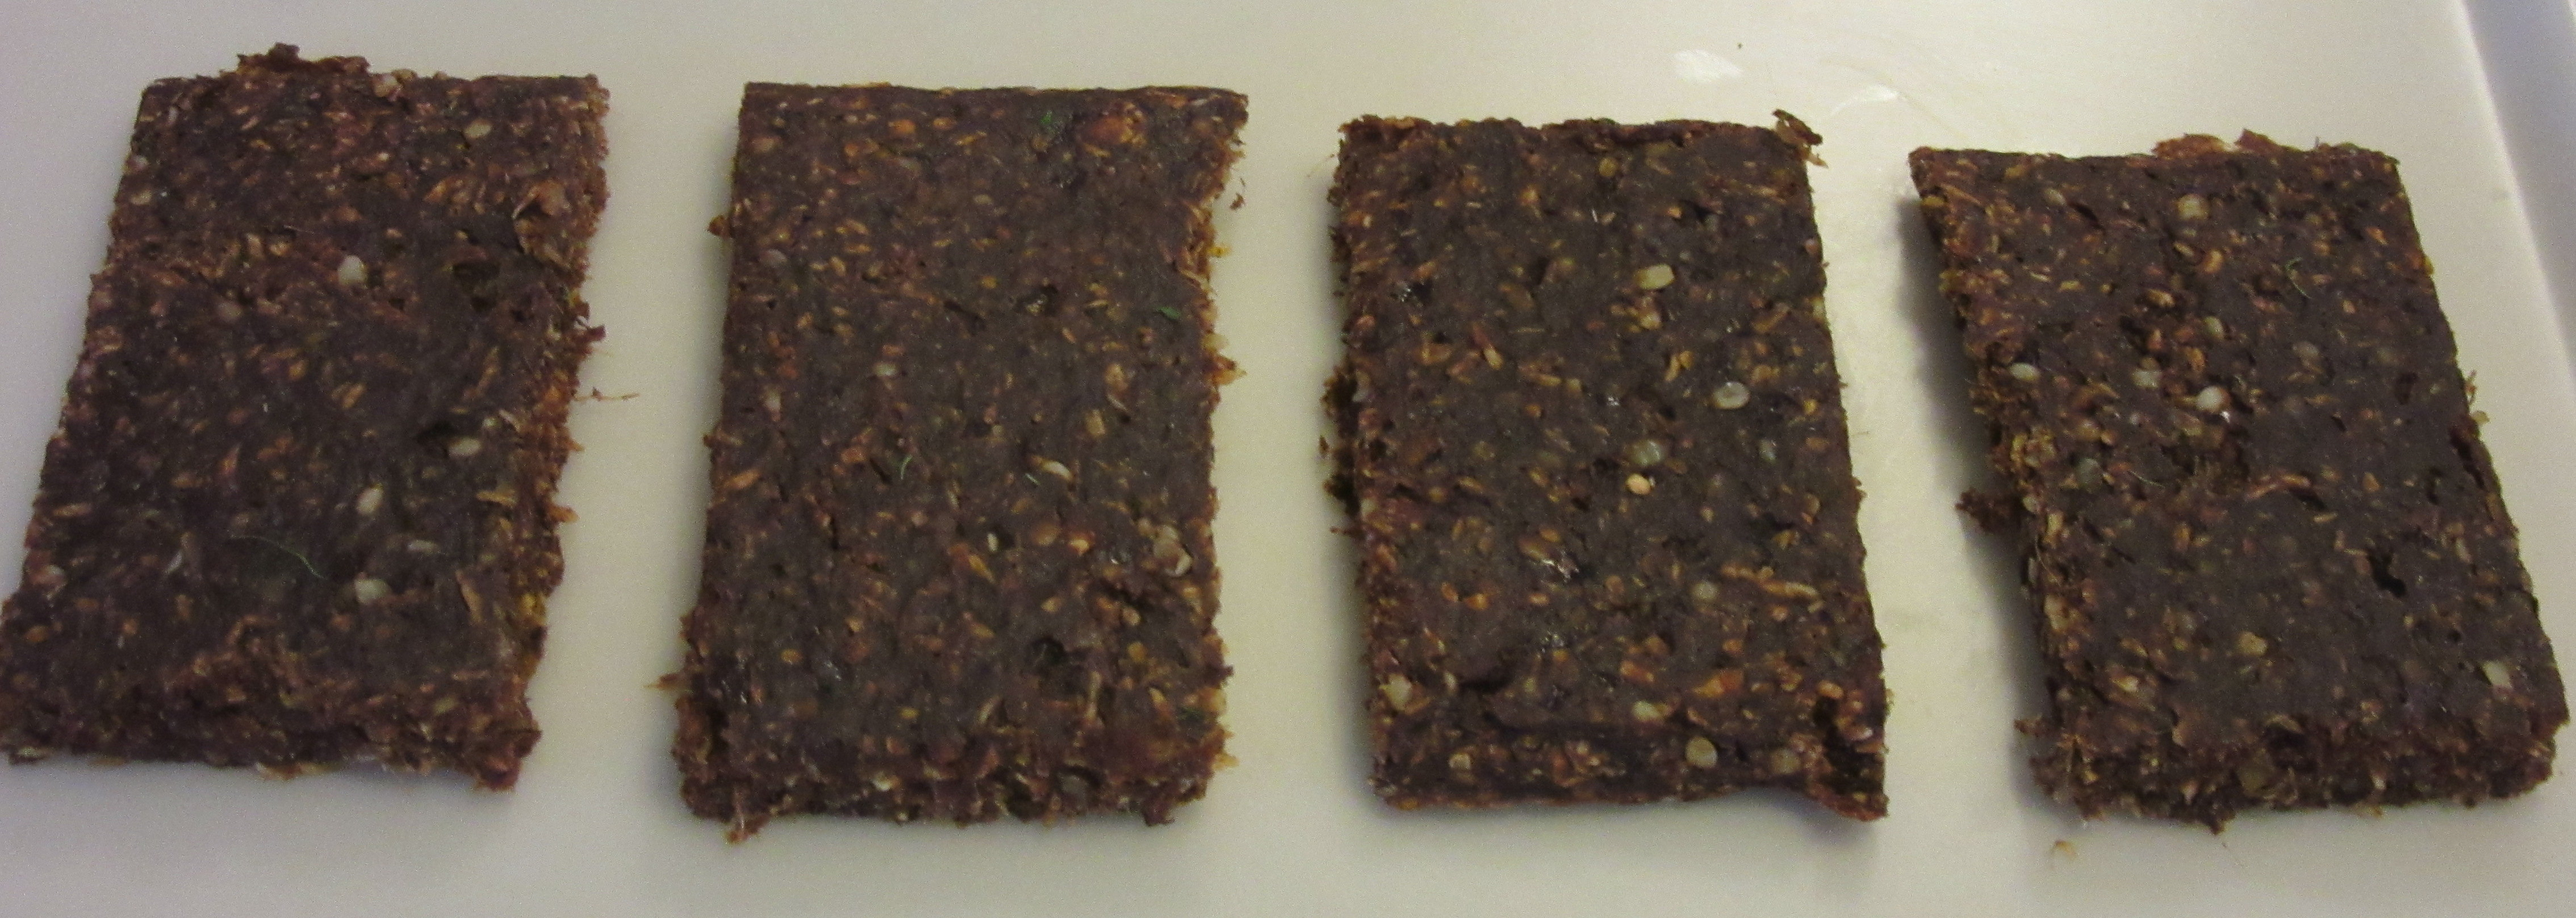 Dehydrated bars in a tray.